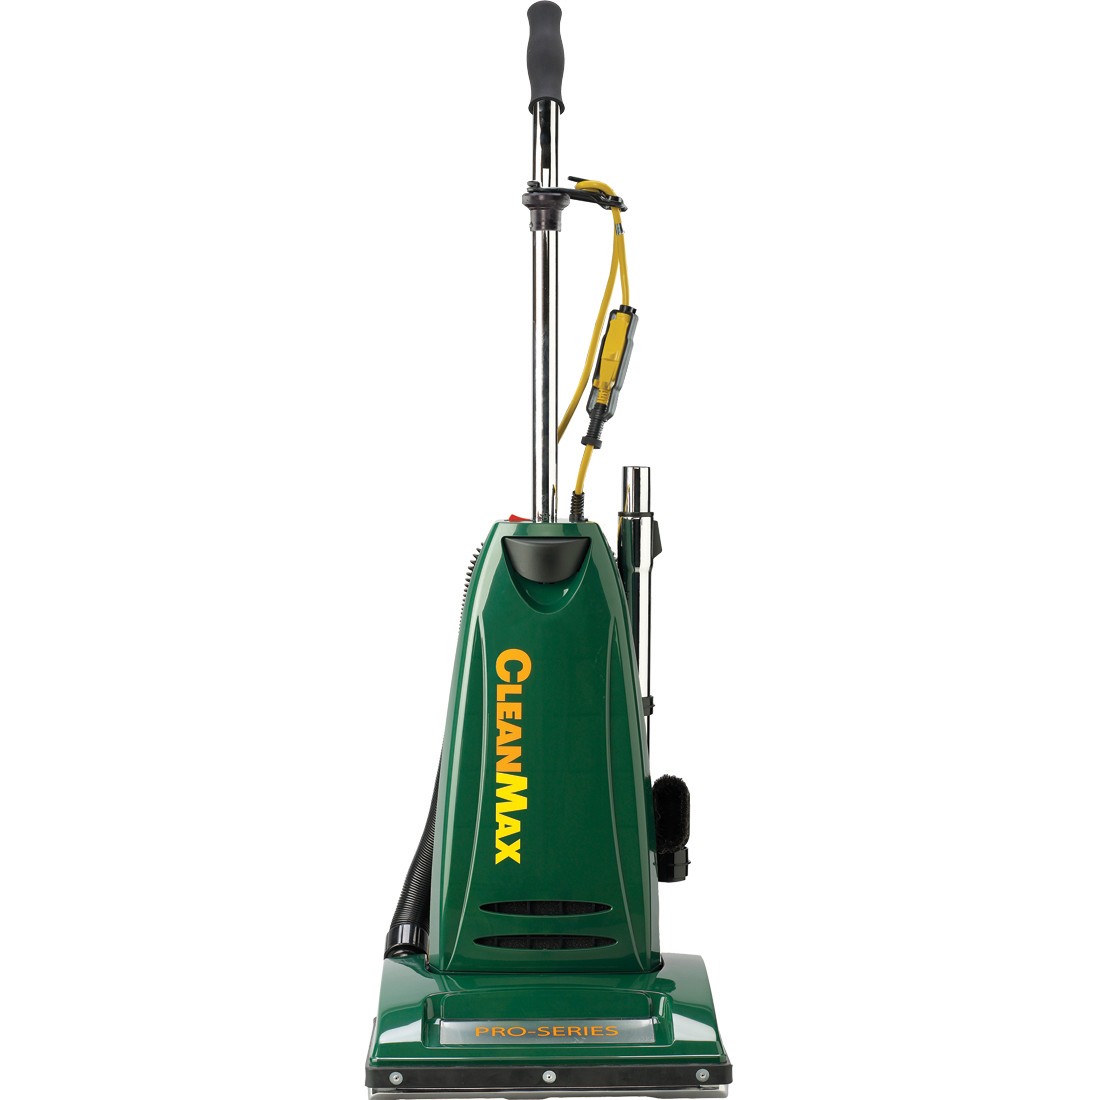 CleanMax Pro Series 3T Vac clean, max, cleanmax, pro, series, commercial, vacuum, HEPA, 3t, vac, upright, 